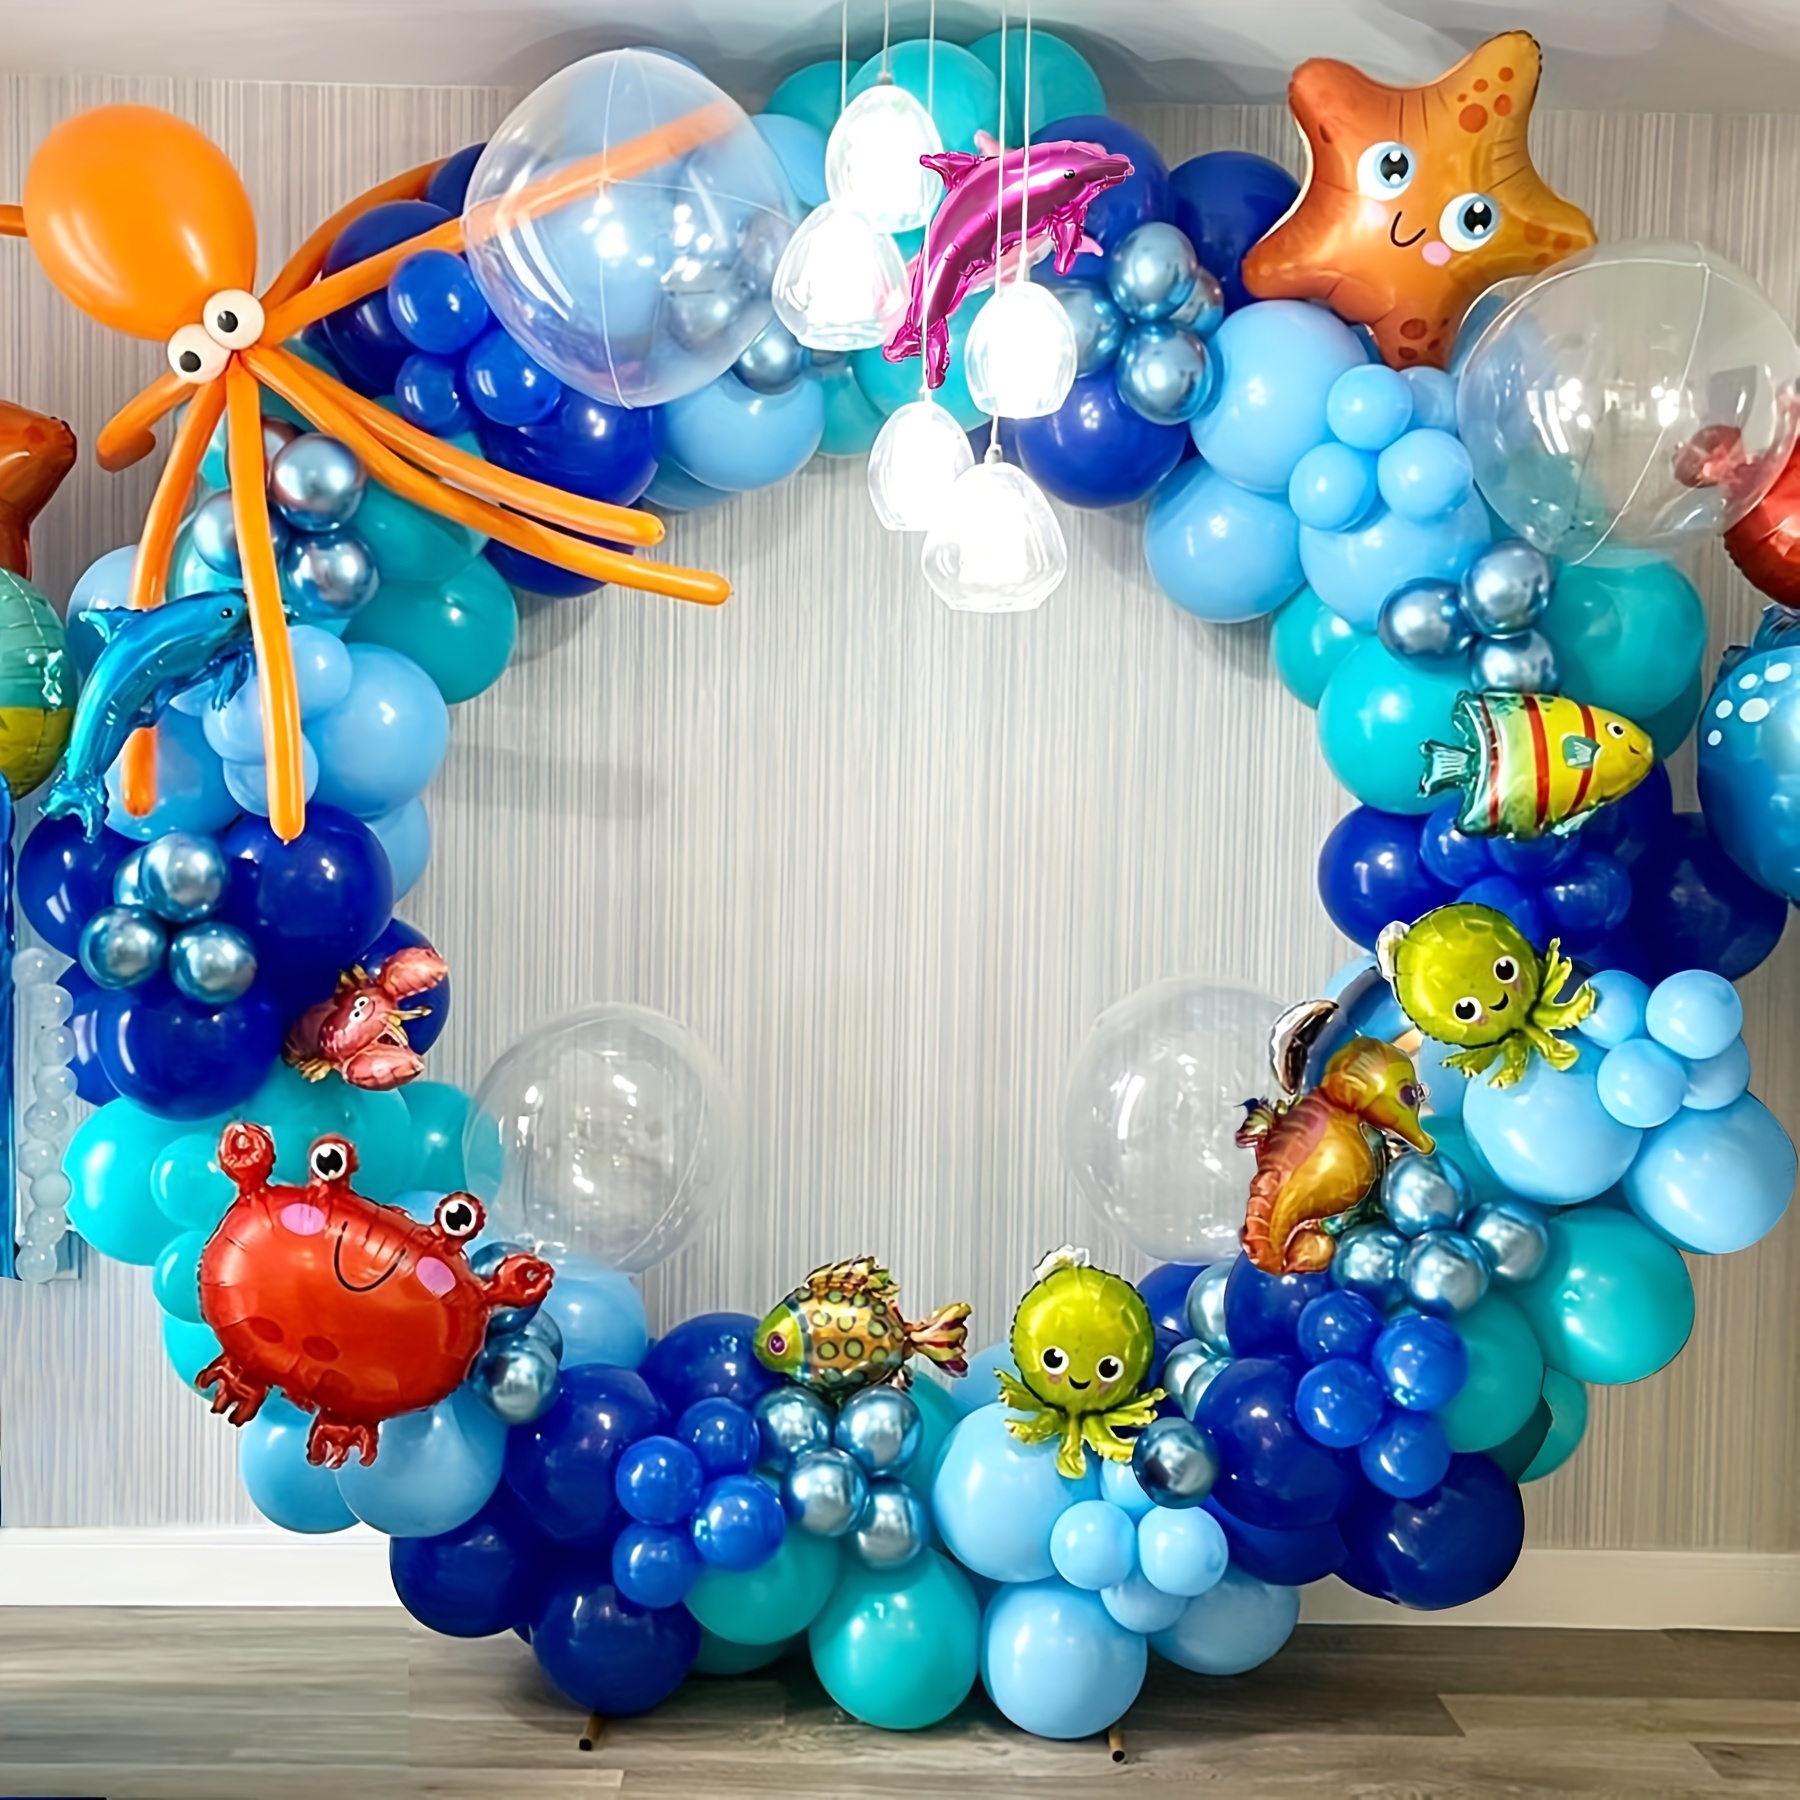  12 Pcs Under The Sea Party Decorations Birthday Decorations  Honeycomb Centerpieces for Kids Under the Sea Table Toppers Decorations  Ocean Themed : Toys & Games